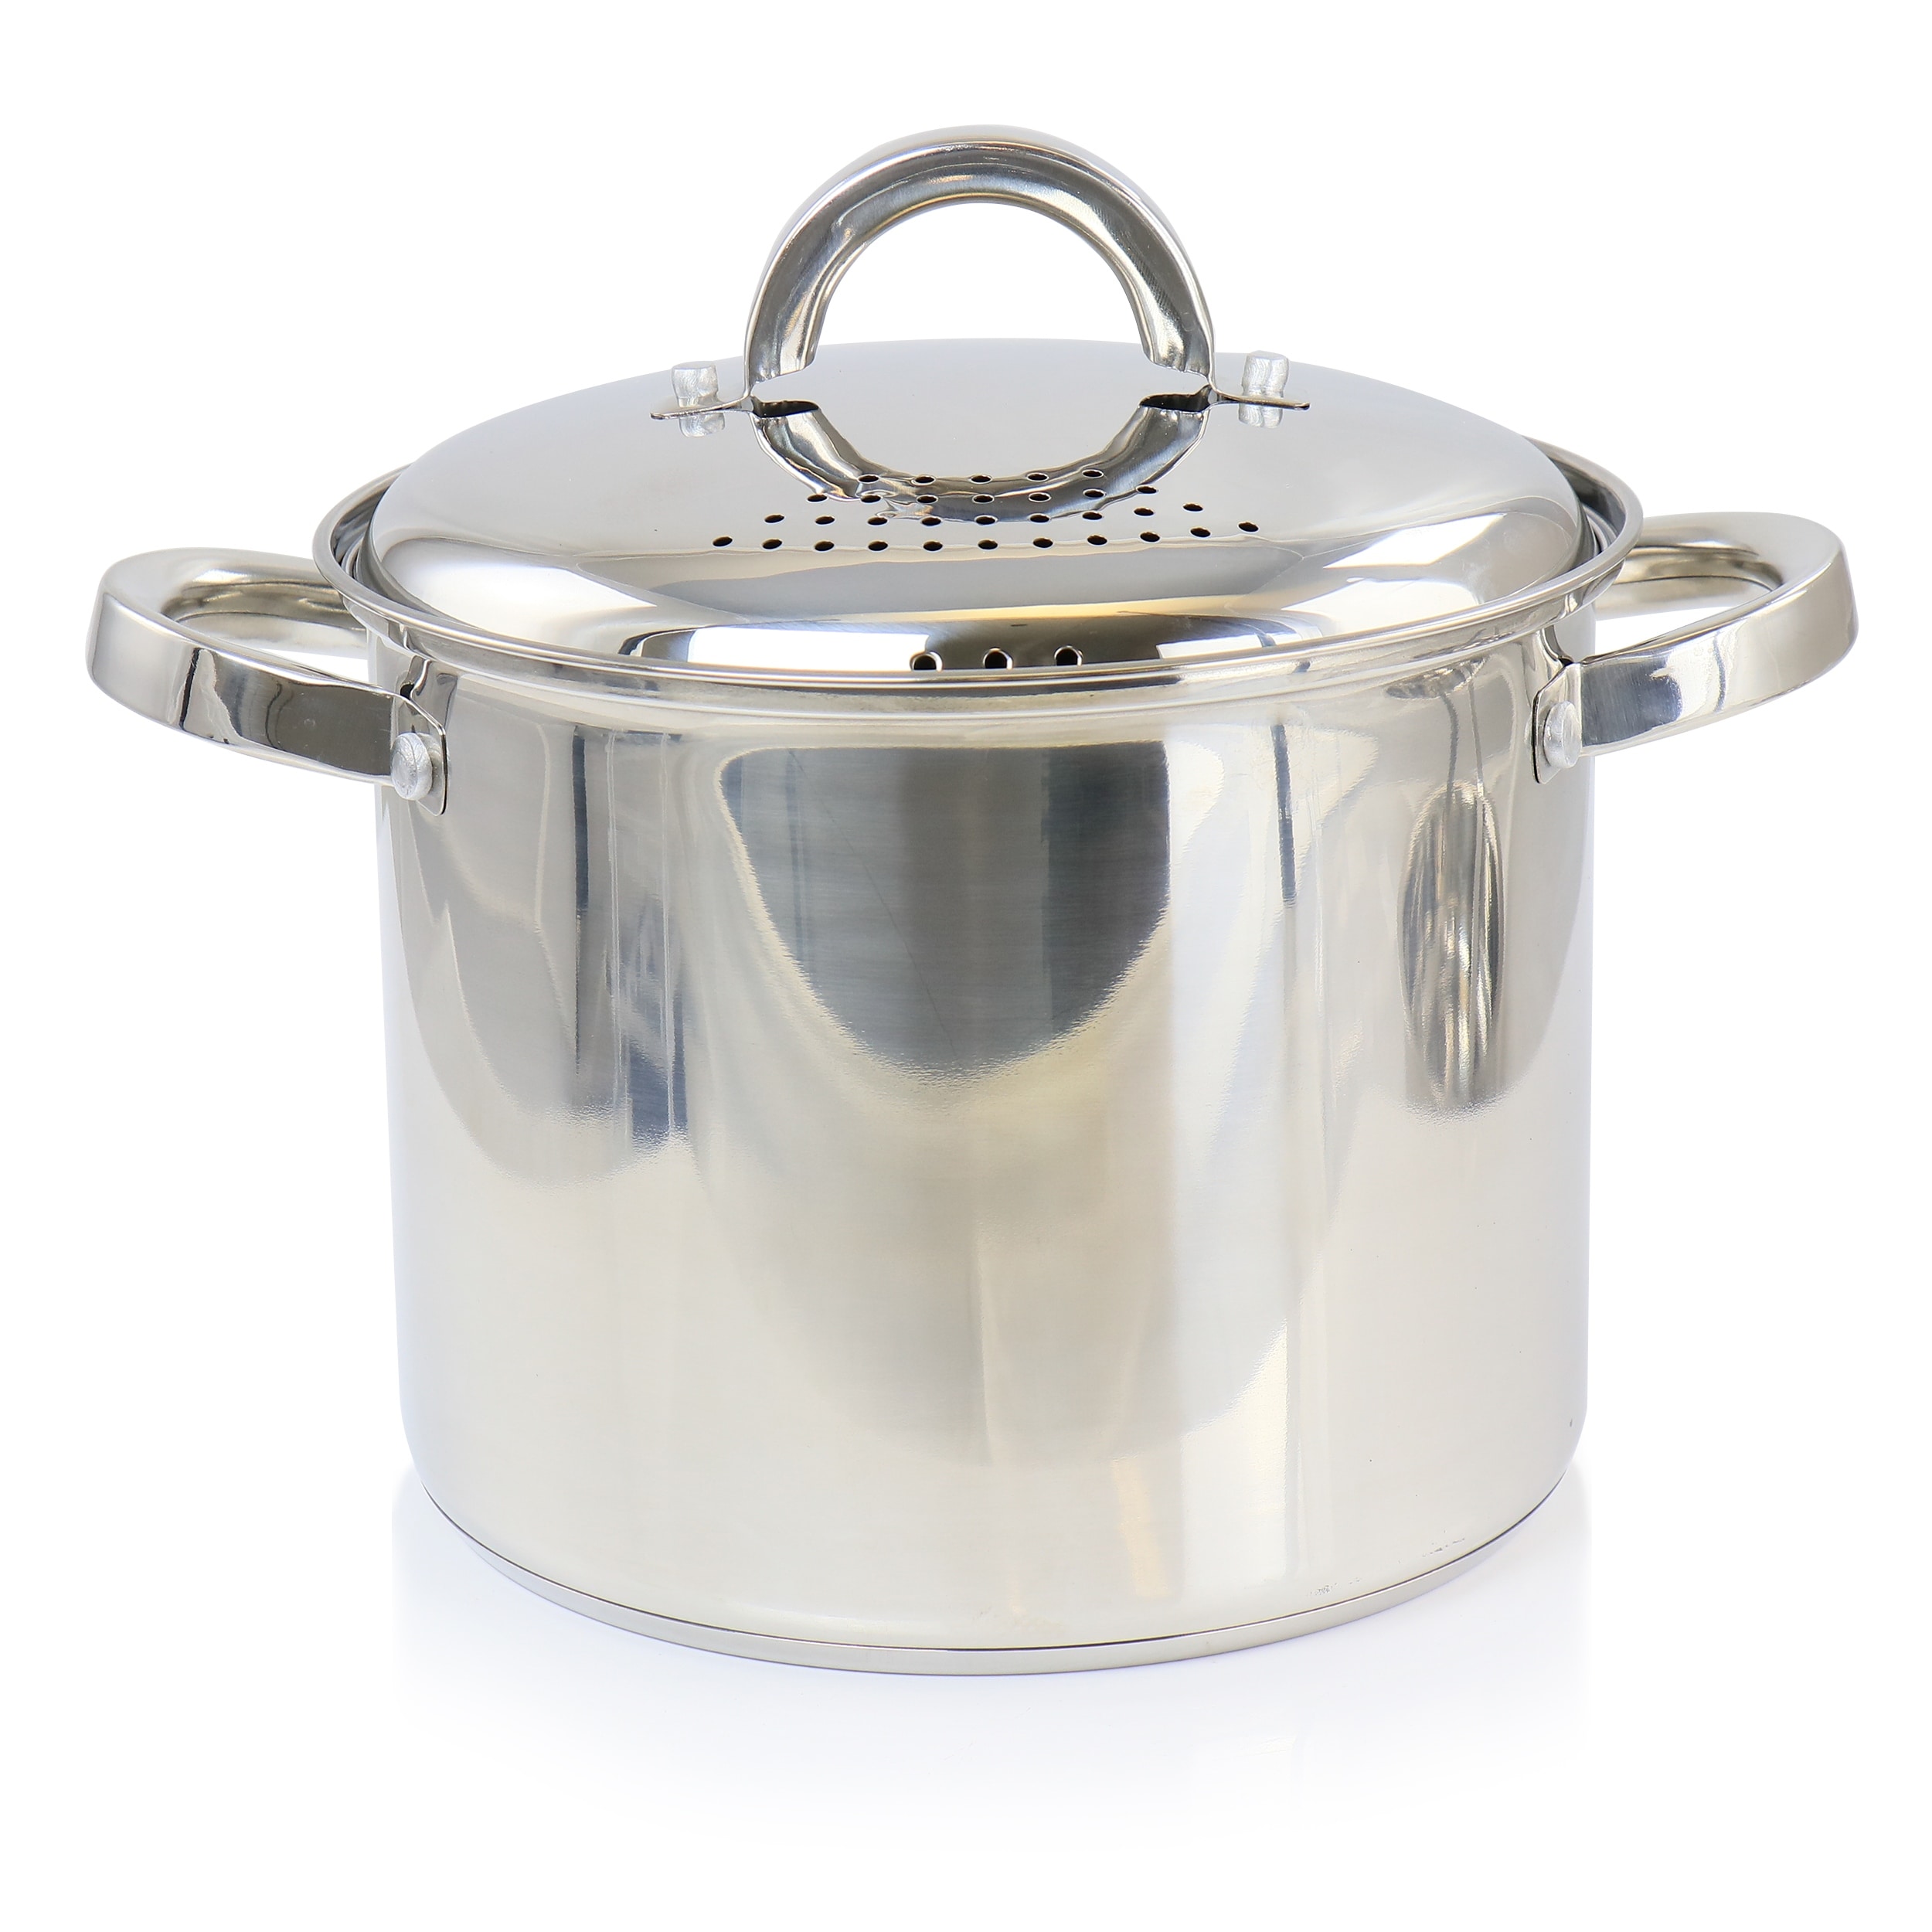 Sangerfield 5 Quart Stainless Steel Pasta Pot with Strainer Lid and Steamer  Basket - Bed Bath & Beyond - 35278972